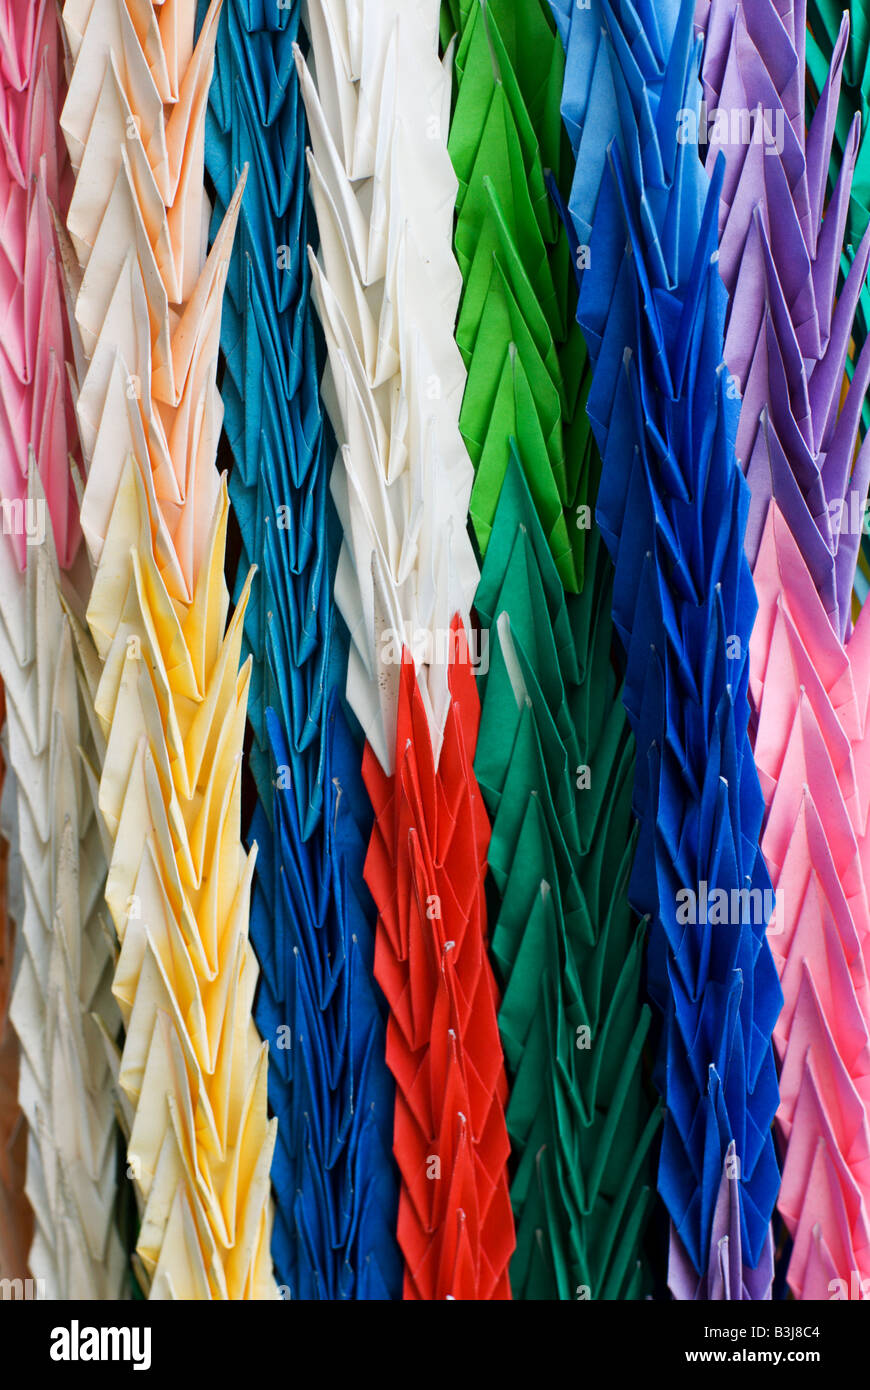 Long chains of colourful paper cranes making a thousand cranes is said to make a wish come true hung as prayers at a Shrine. Stock Photo